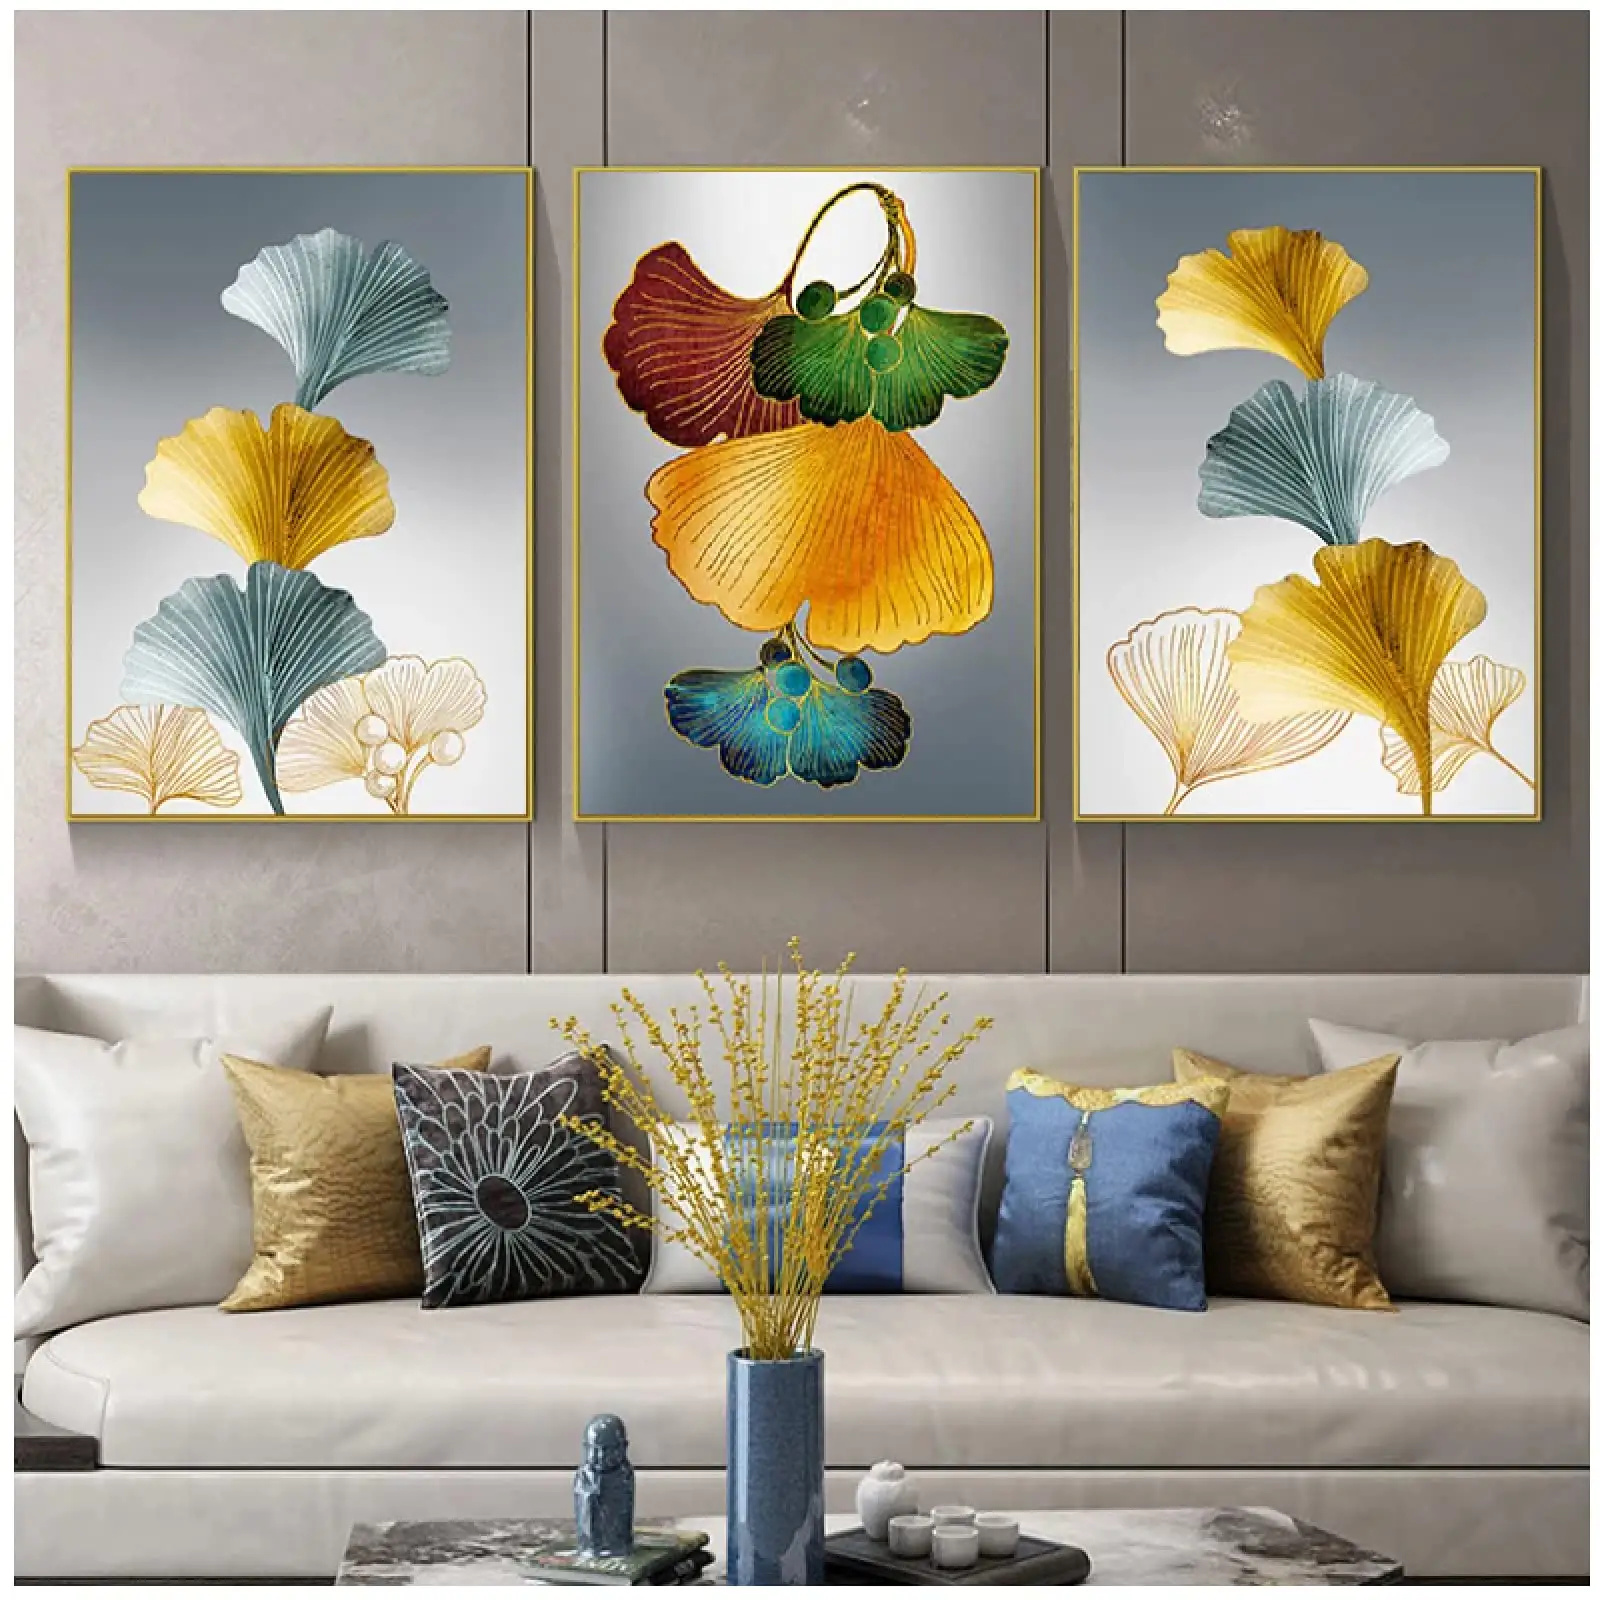 Abstract Leaf Paintings China Trade,Buy China Direct From Abstract 